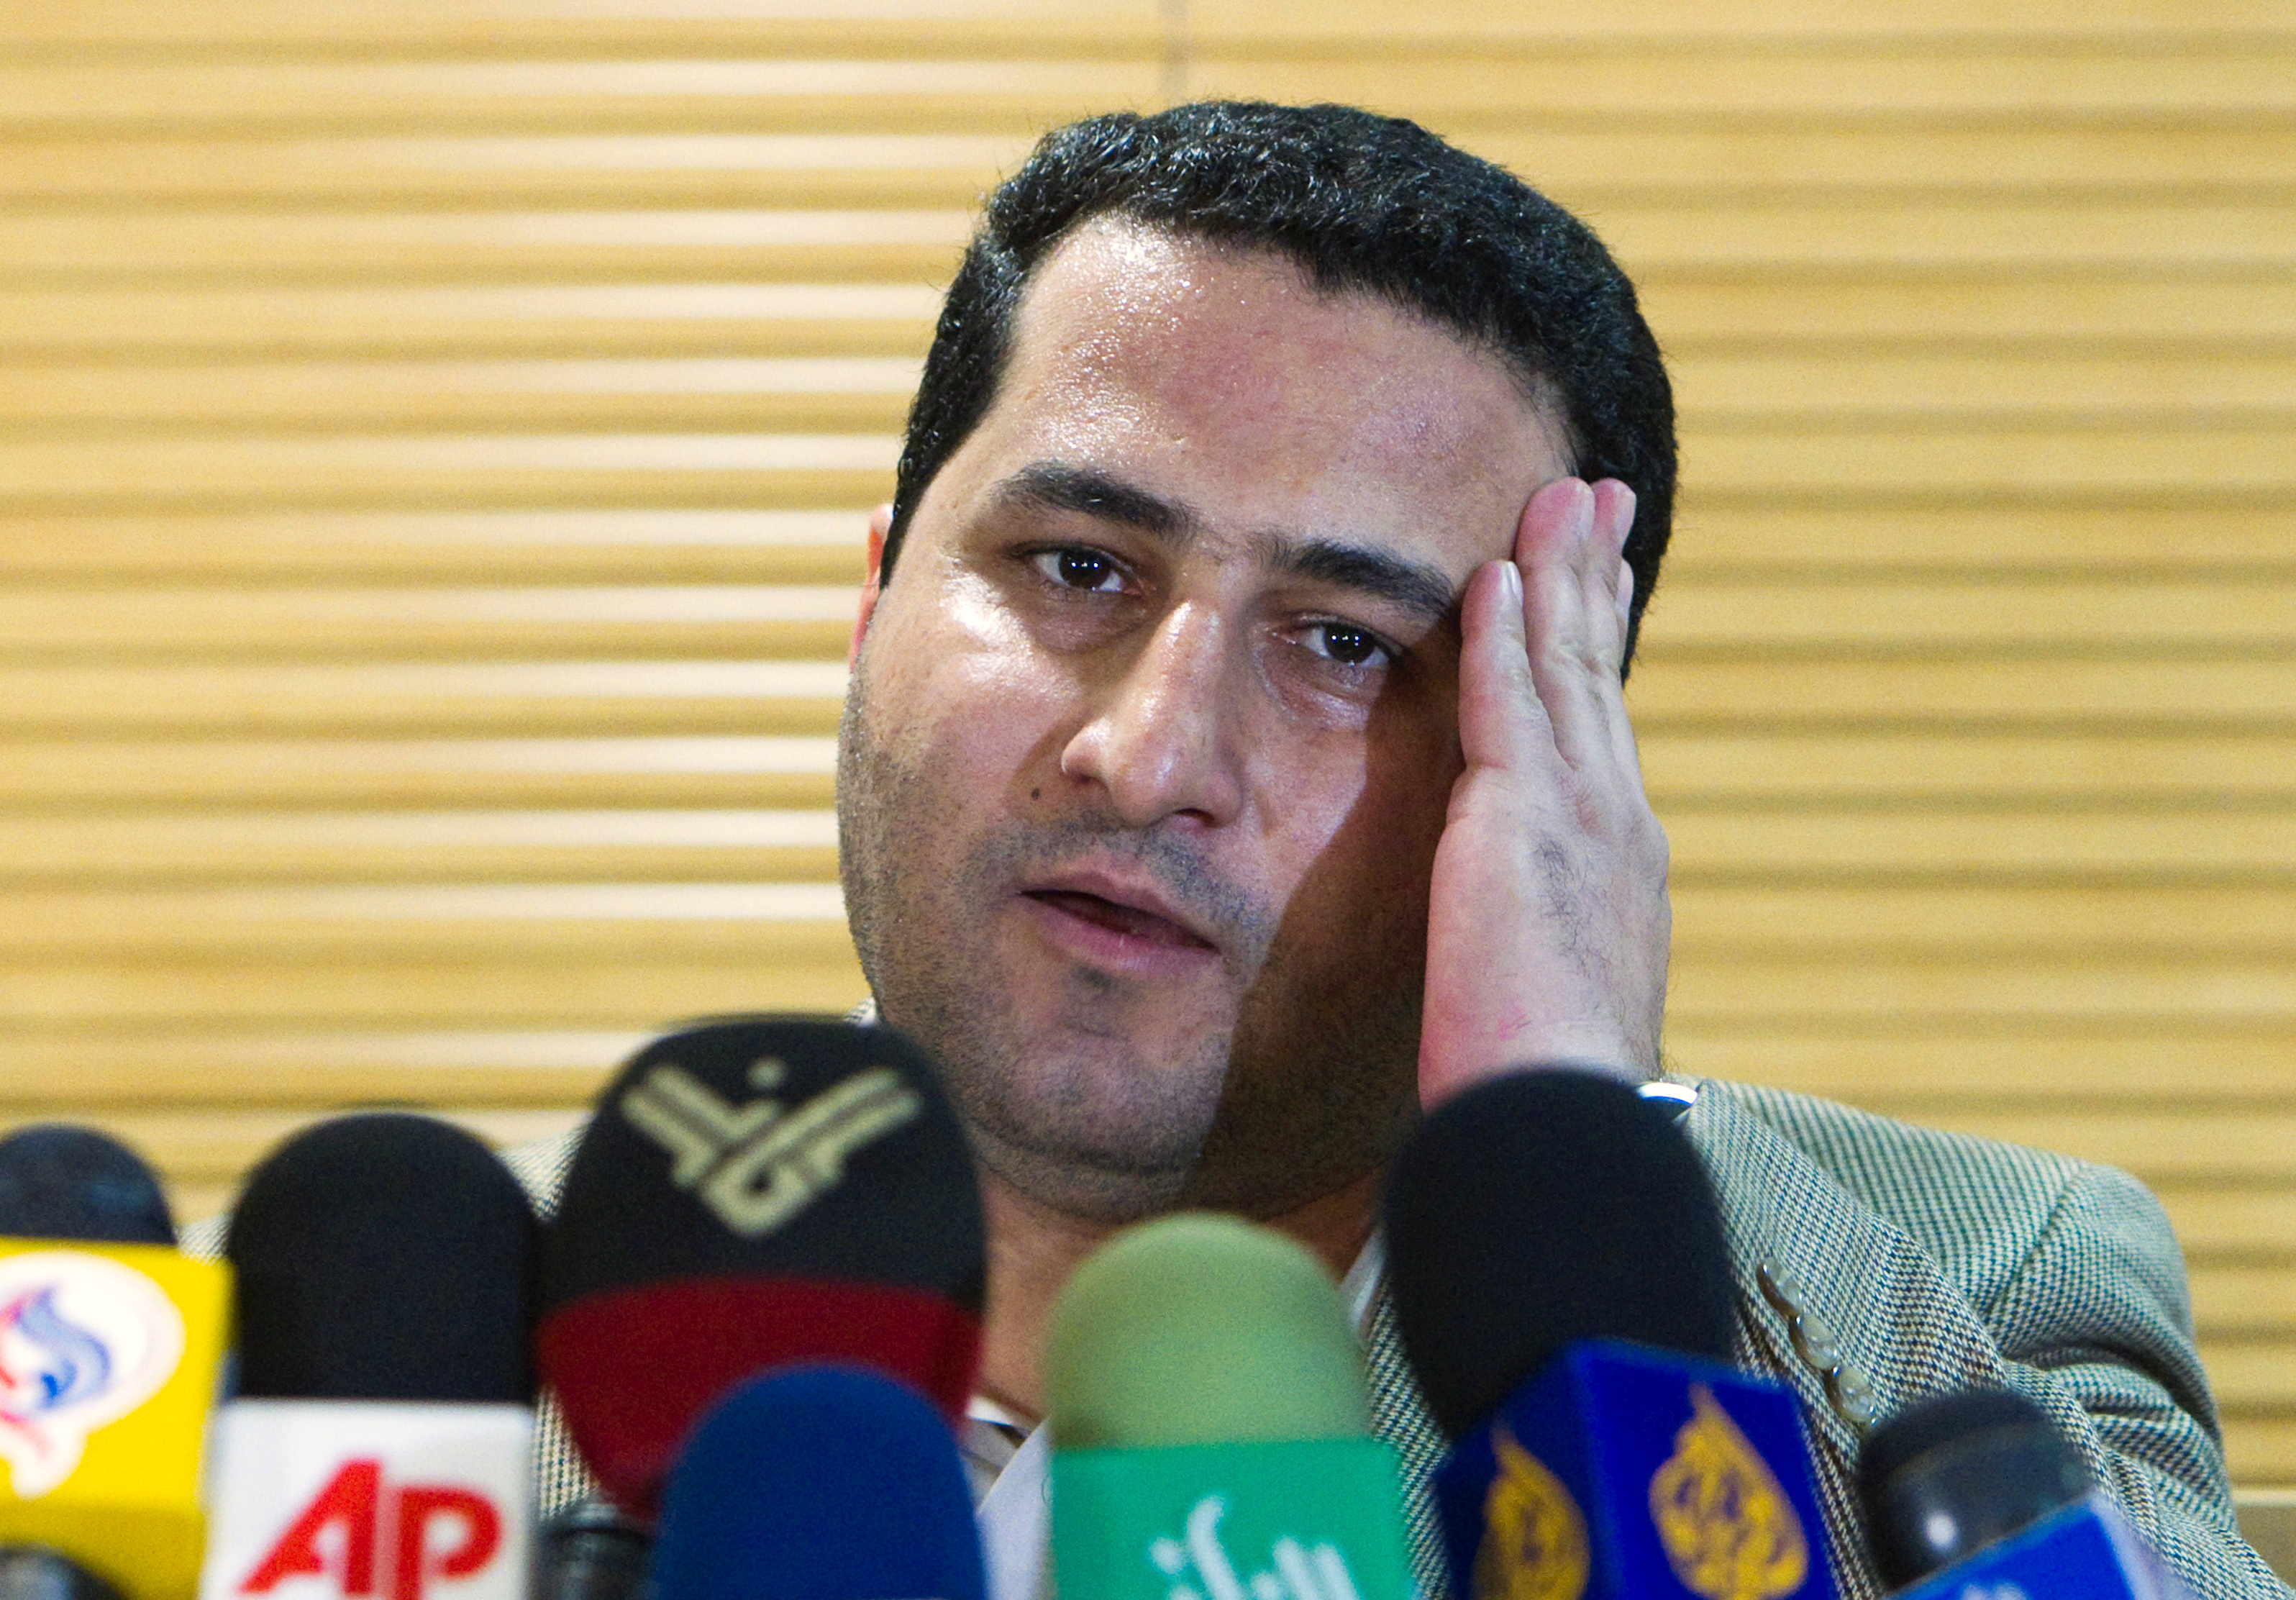 Iranian scientist Shahram Amiri speaks to journalists as he arrives at the Imam Khomini Airport in Tehran